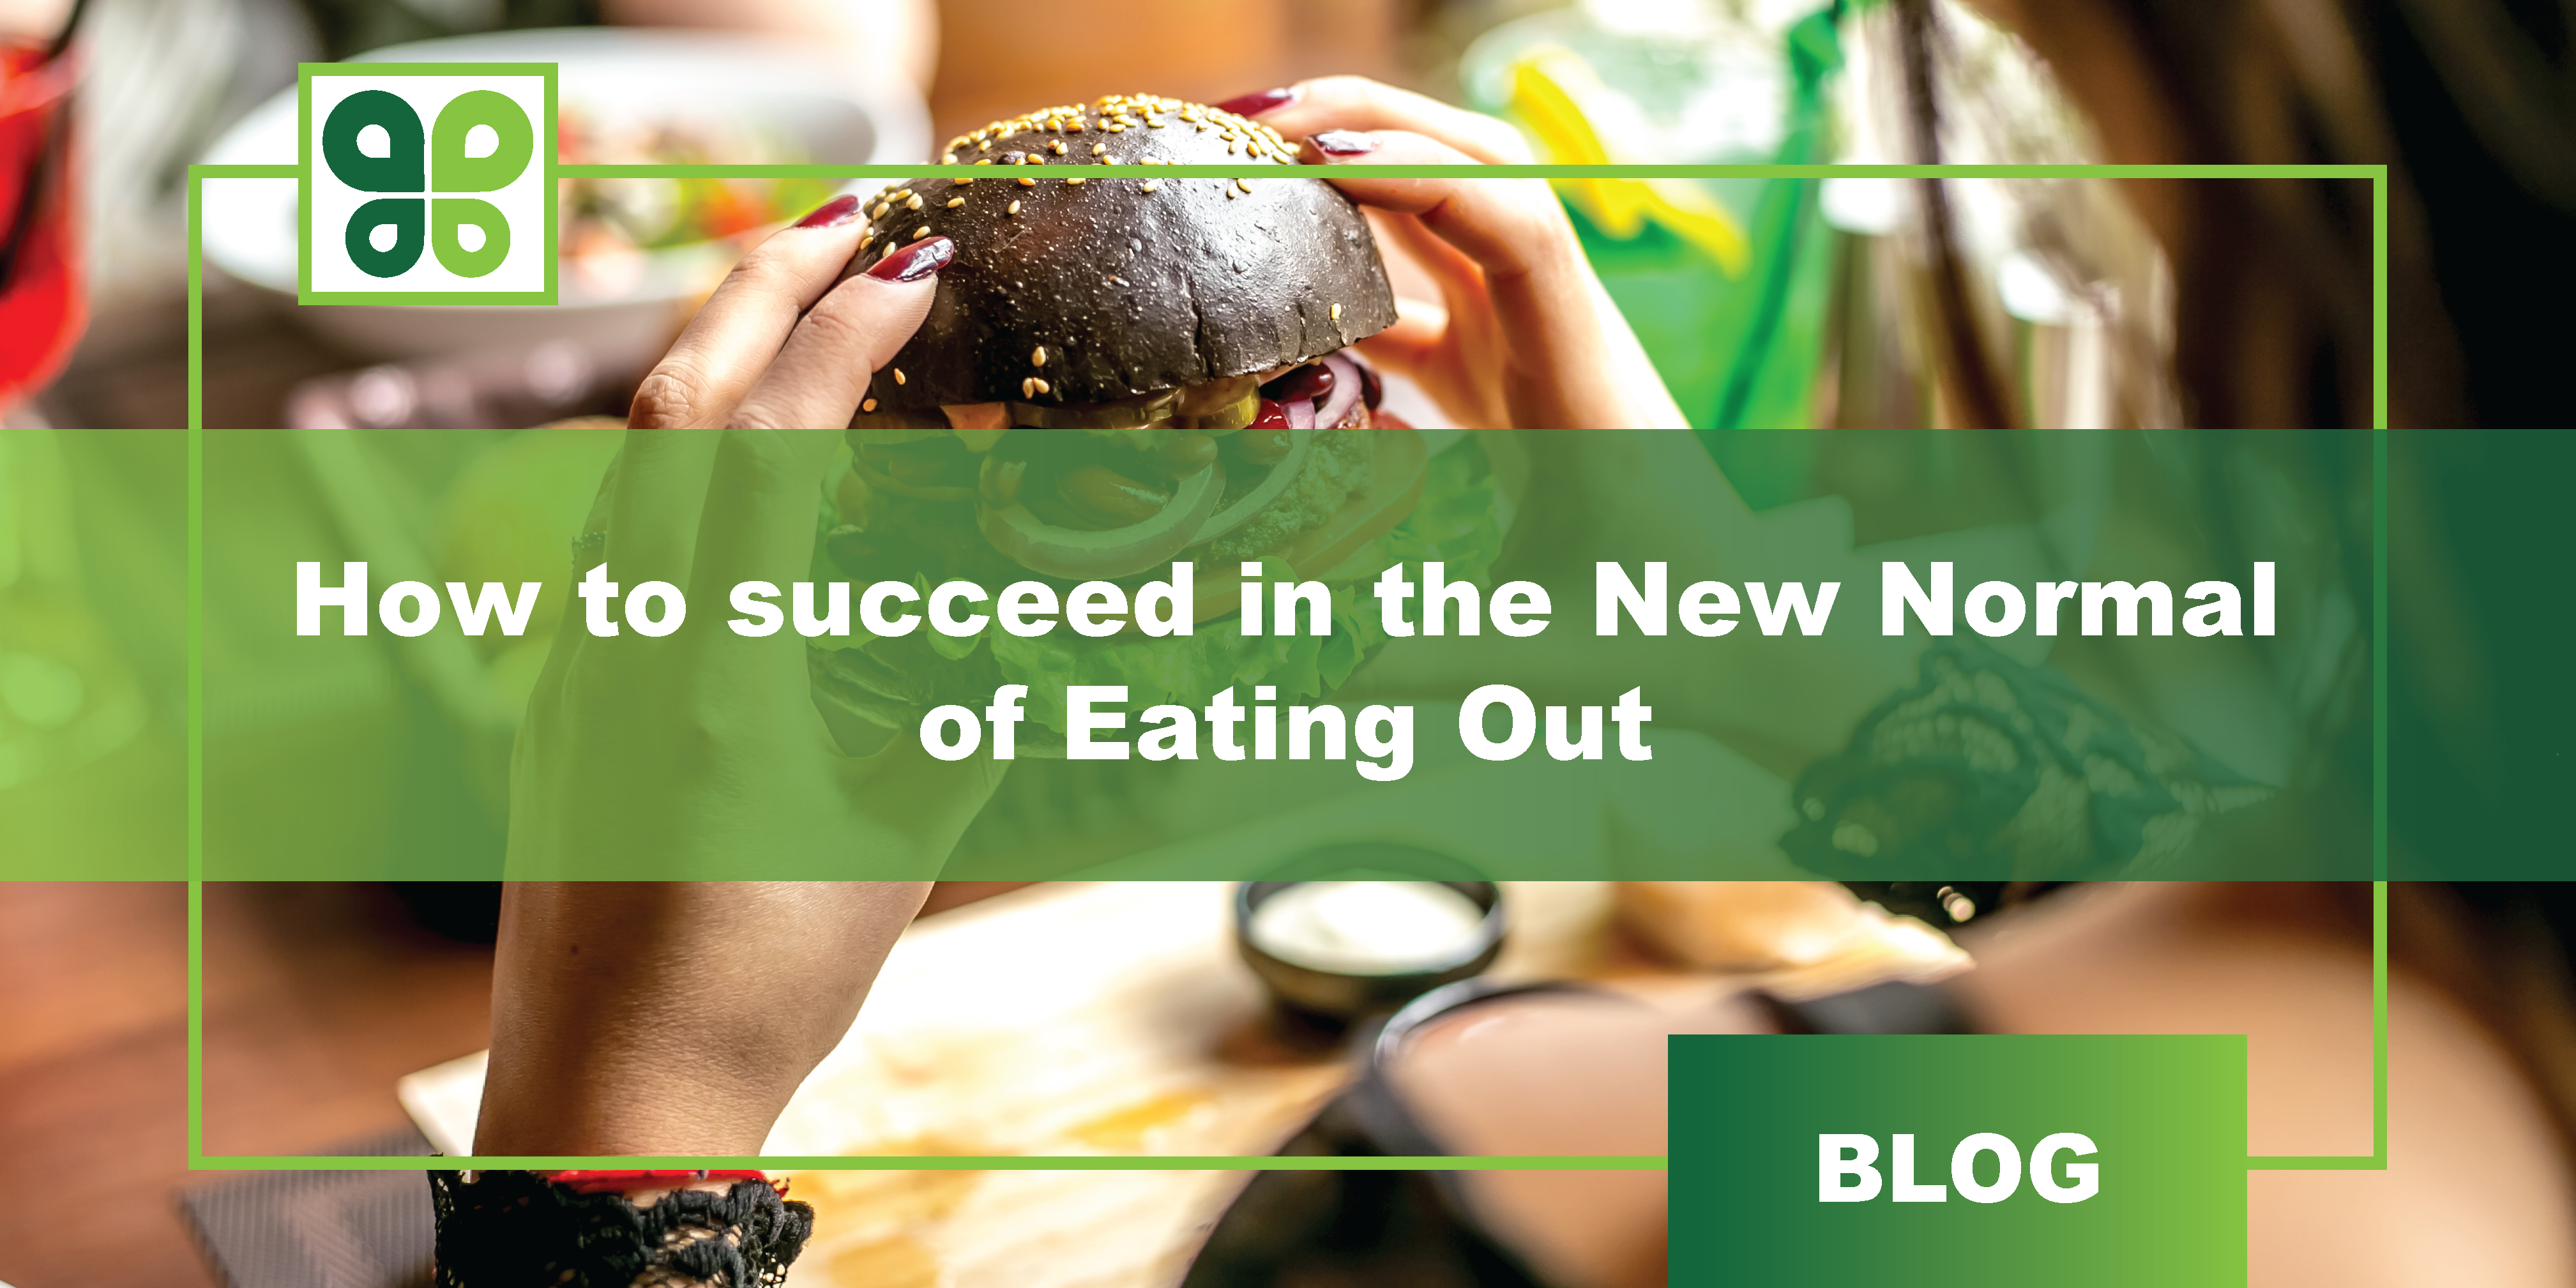 Multi-Unit QSR (Fast Food) Owner/Operators and Groups - How to succeed in the New Normal of Eating Out